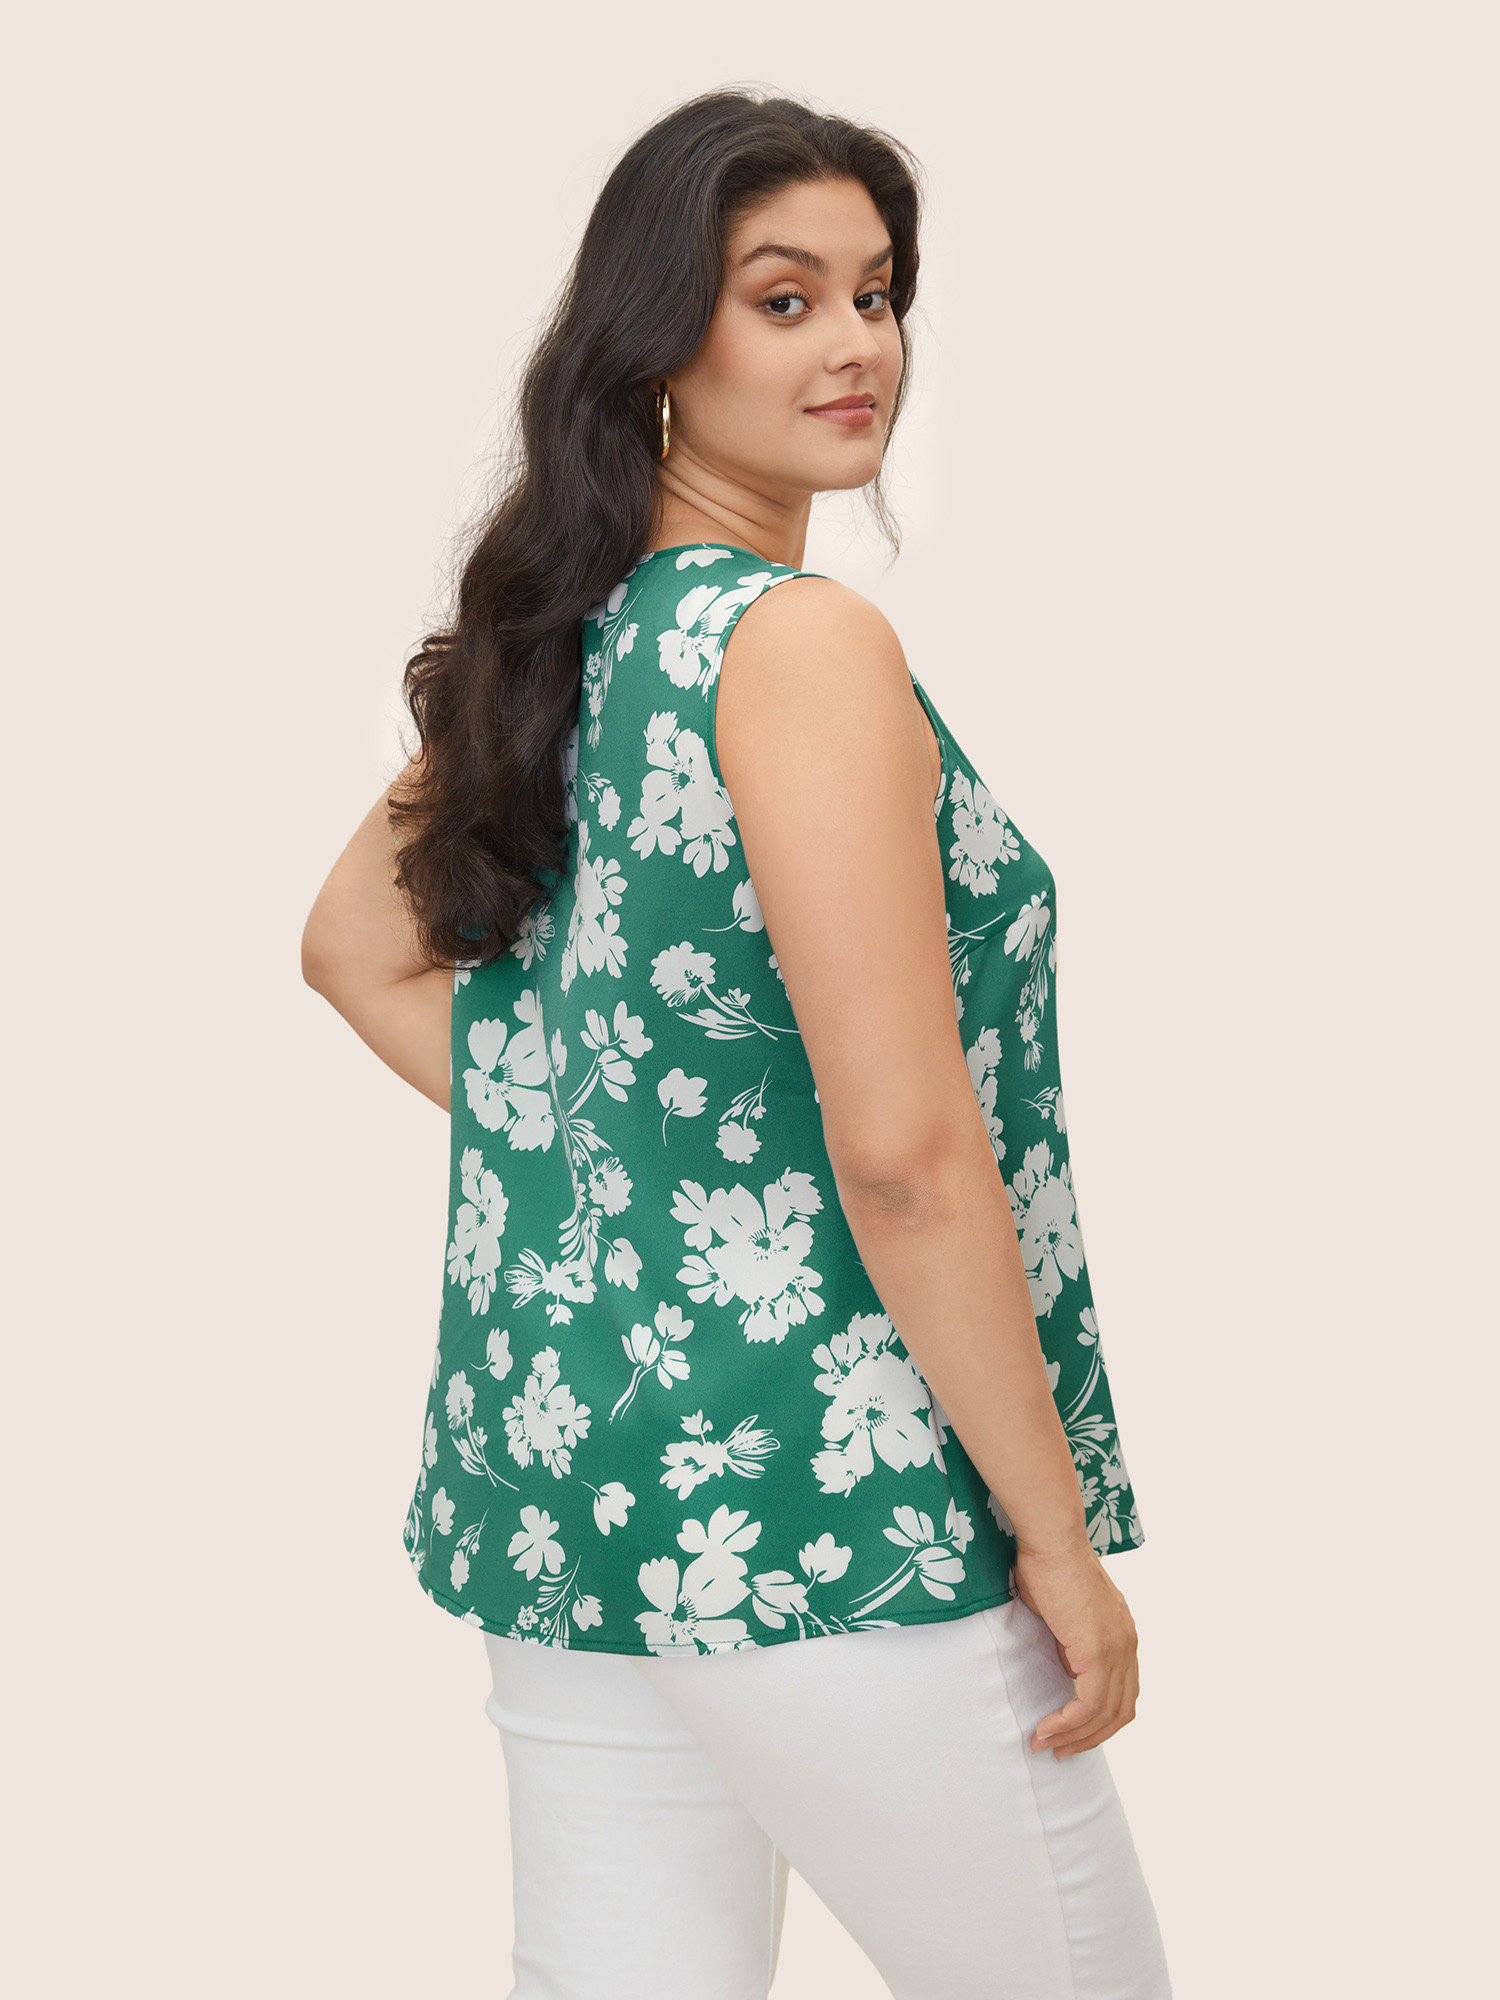 

Plus Size Silhouette Floral Print Button Detail Tank Top Women Green Elegant Button V-neck Everyday Tank Tops Camis BloomChic